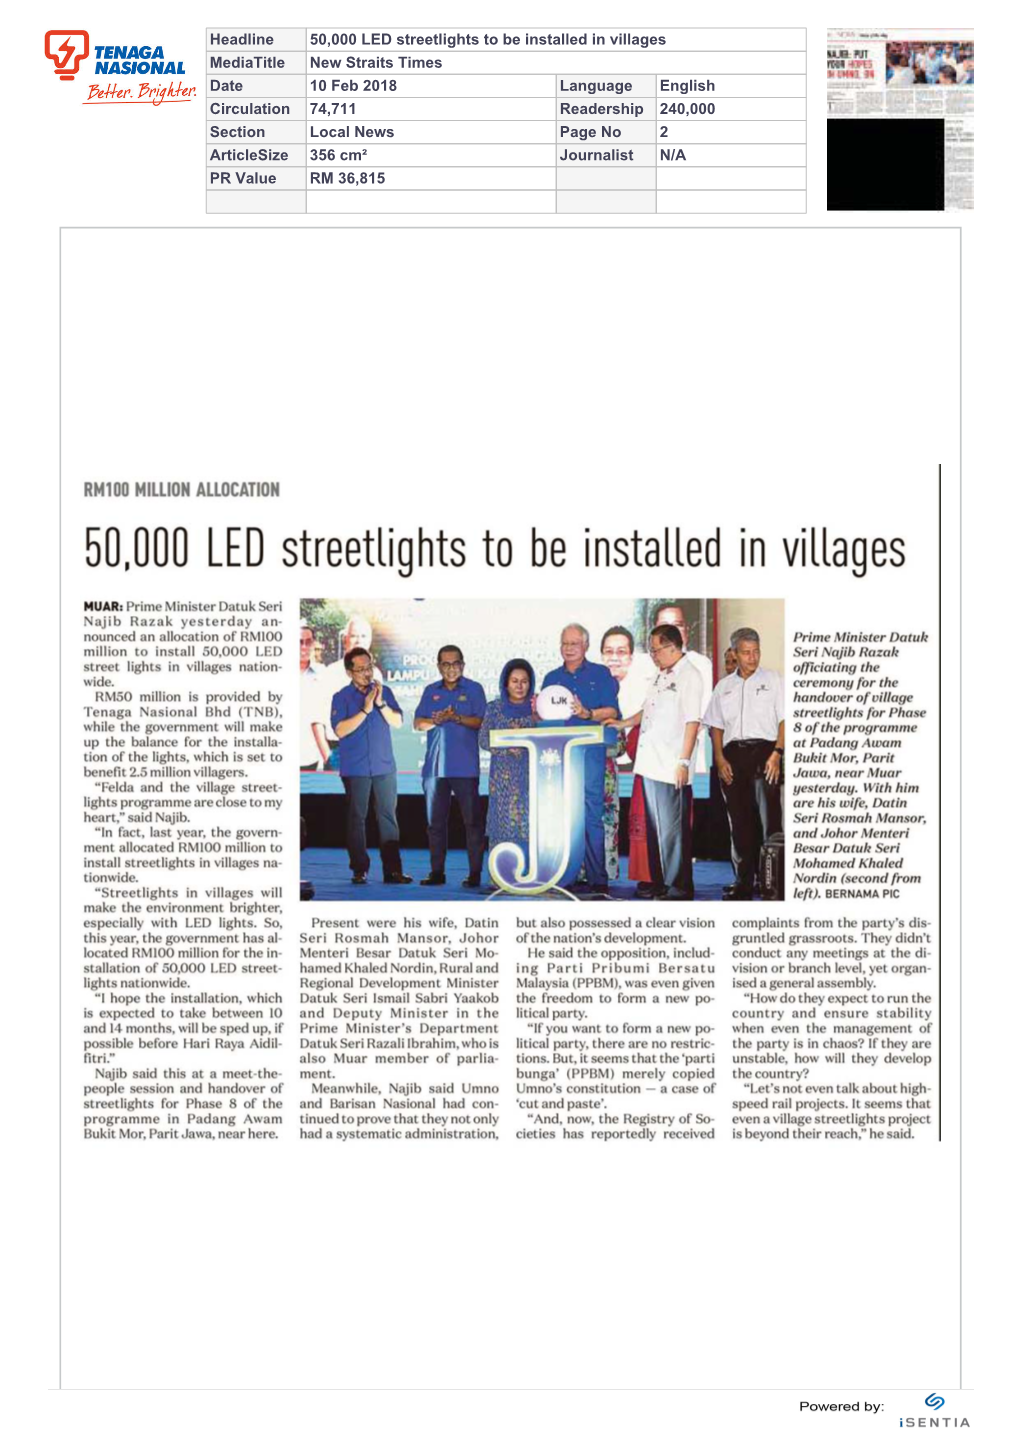 50,000 LED Streetlights to Be Installed in Villages